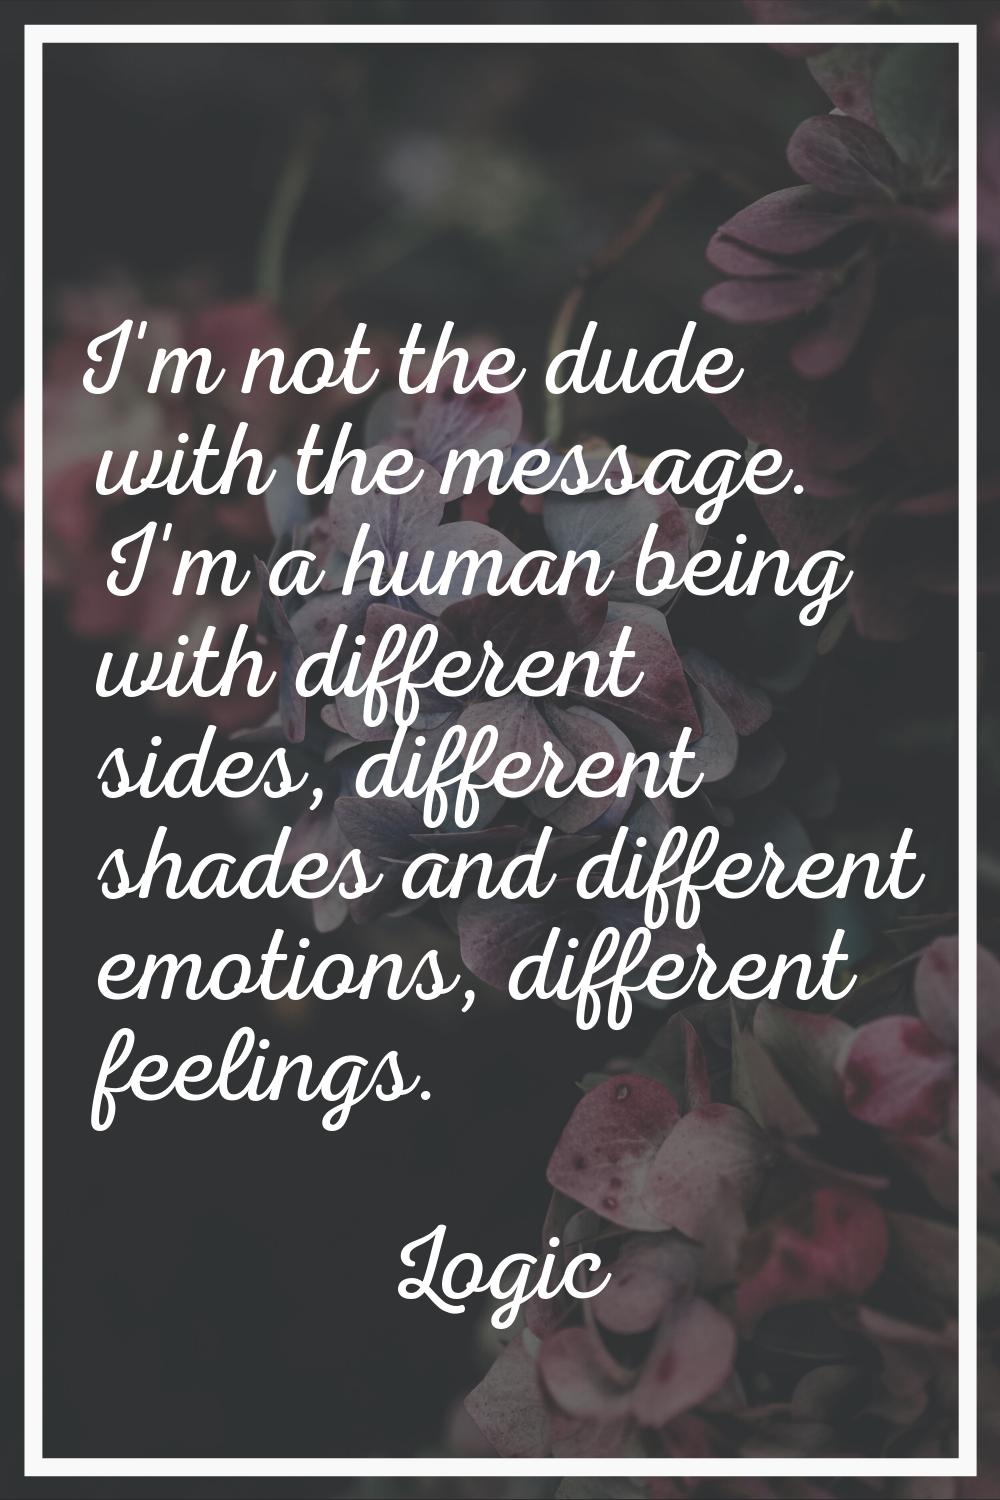 I'm not the dude with the message. I'm a human being with different sides, different shades and dif